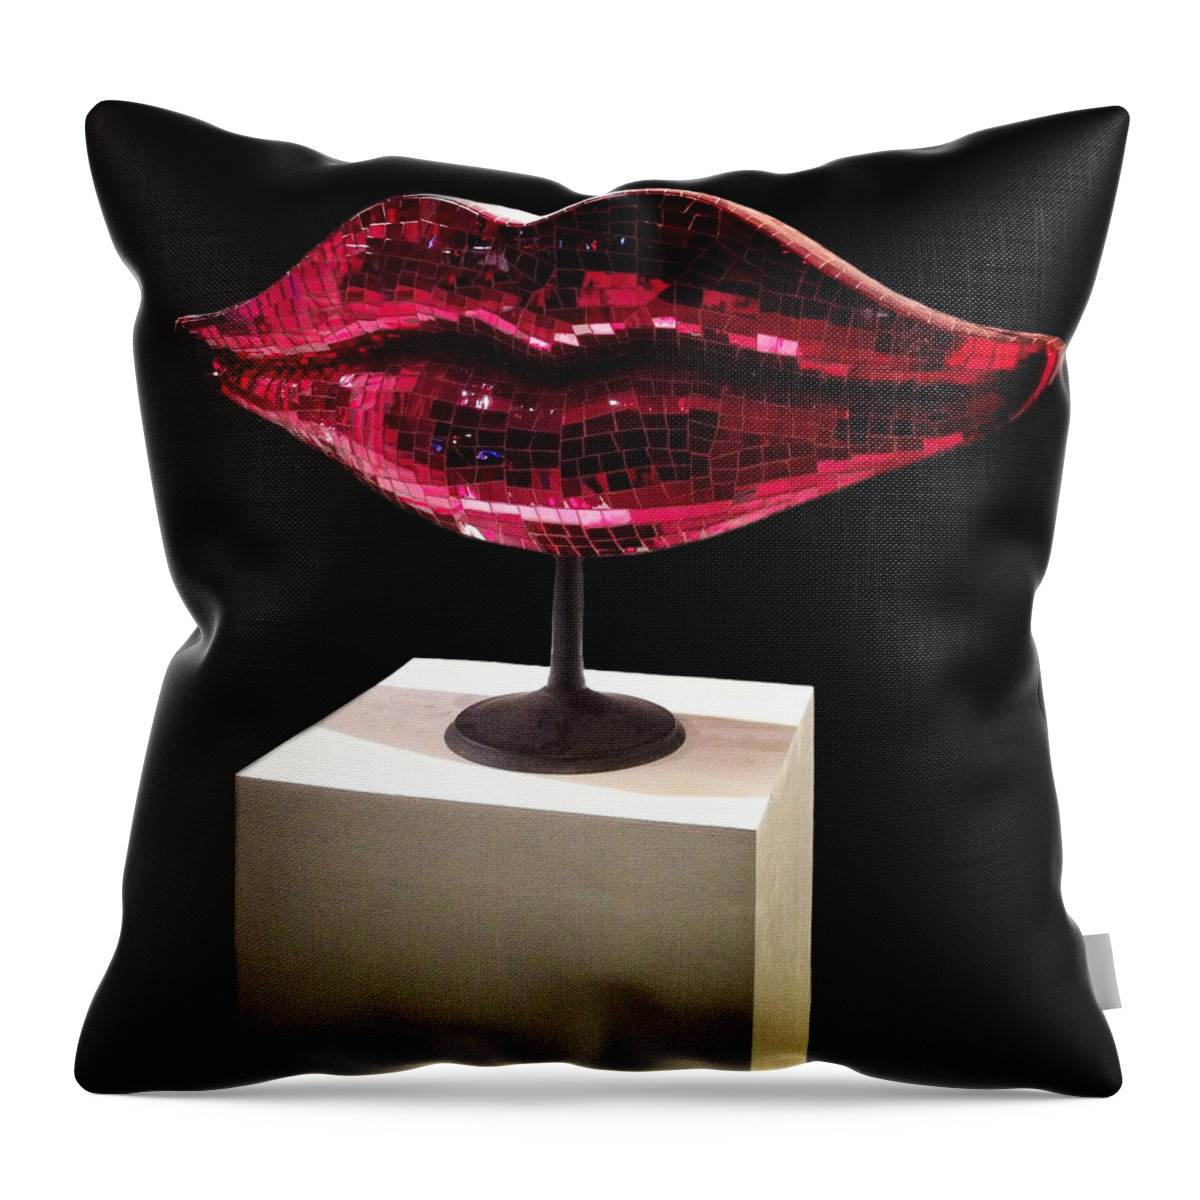 Lips Throw Pillow featuring the photograph Chelsea Lips #2 by Natasha Marco